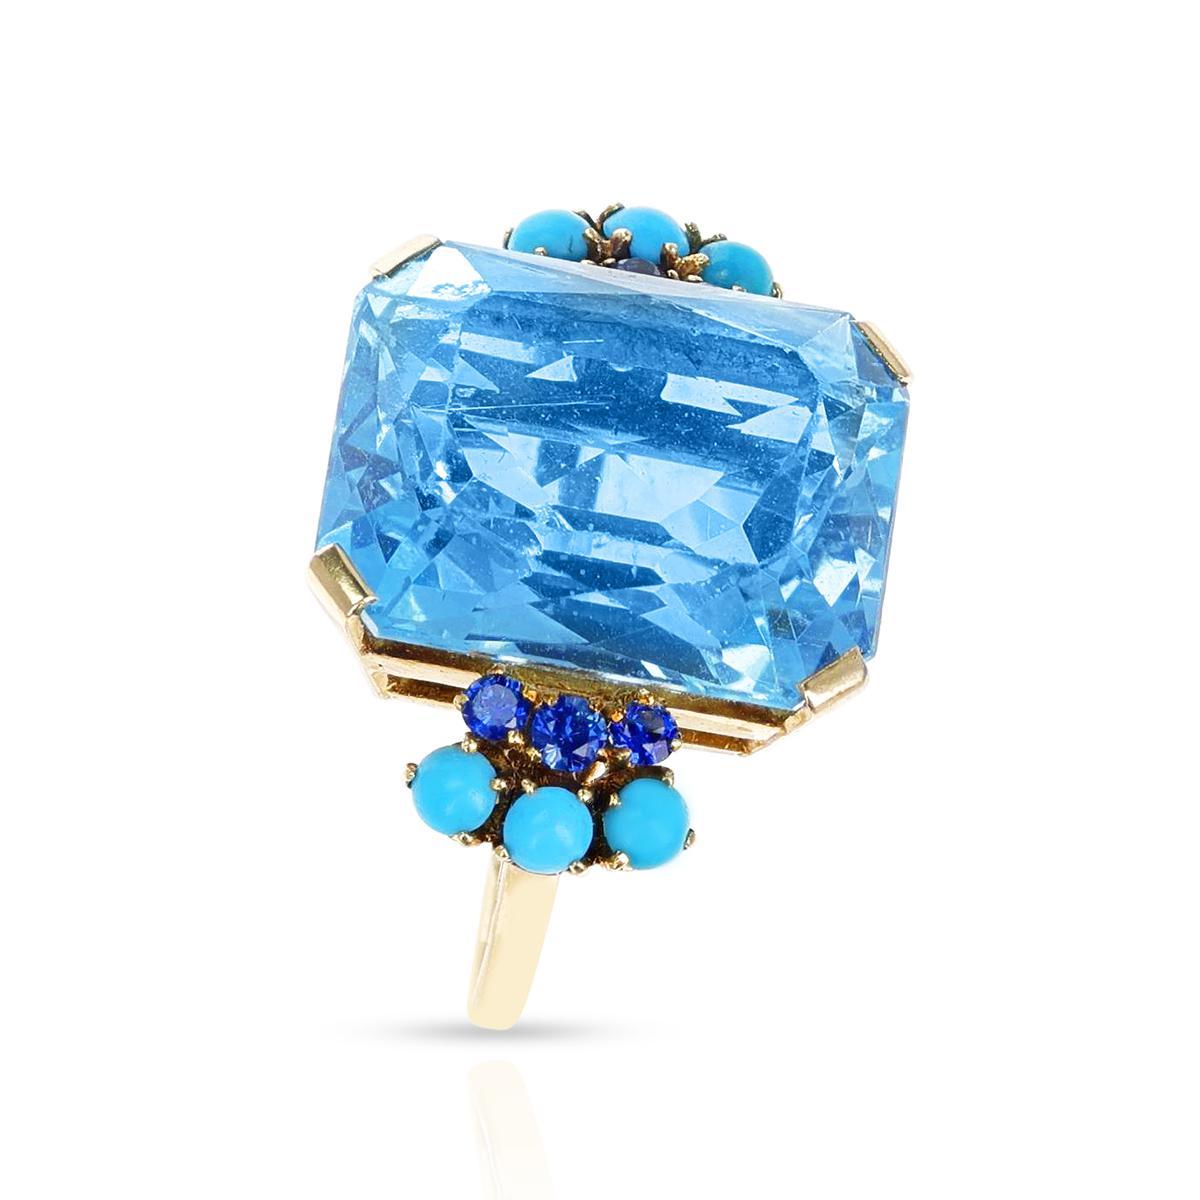 A 25 ct. Aquamarine, Sapphire and Turquoise Cocktail Ring made in 18 Karat Yellow Gold. The total weight is 13.98 grams and the ring size is US 9.